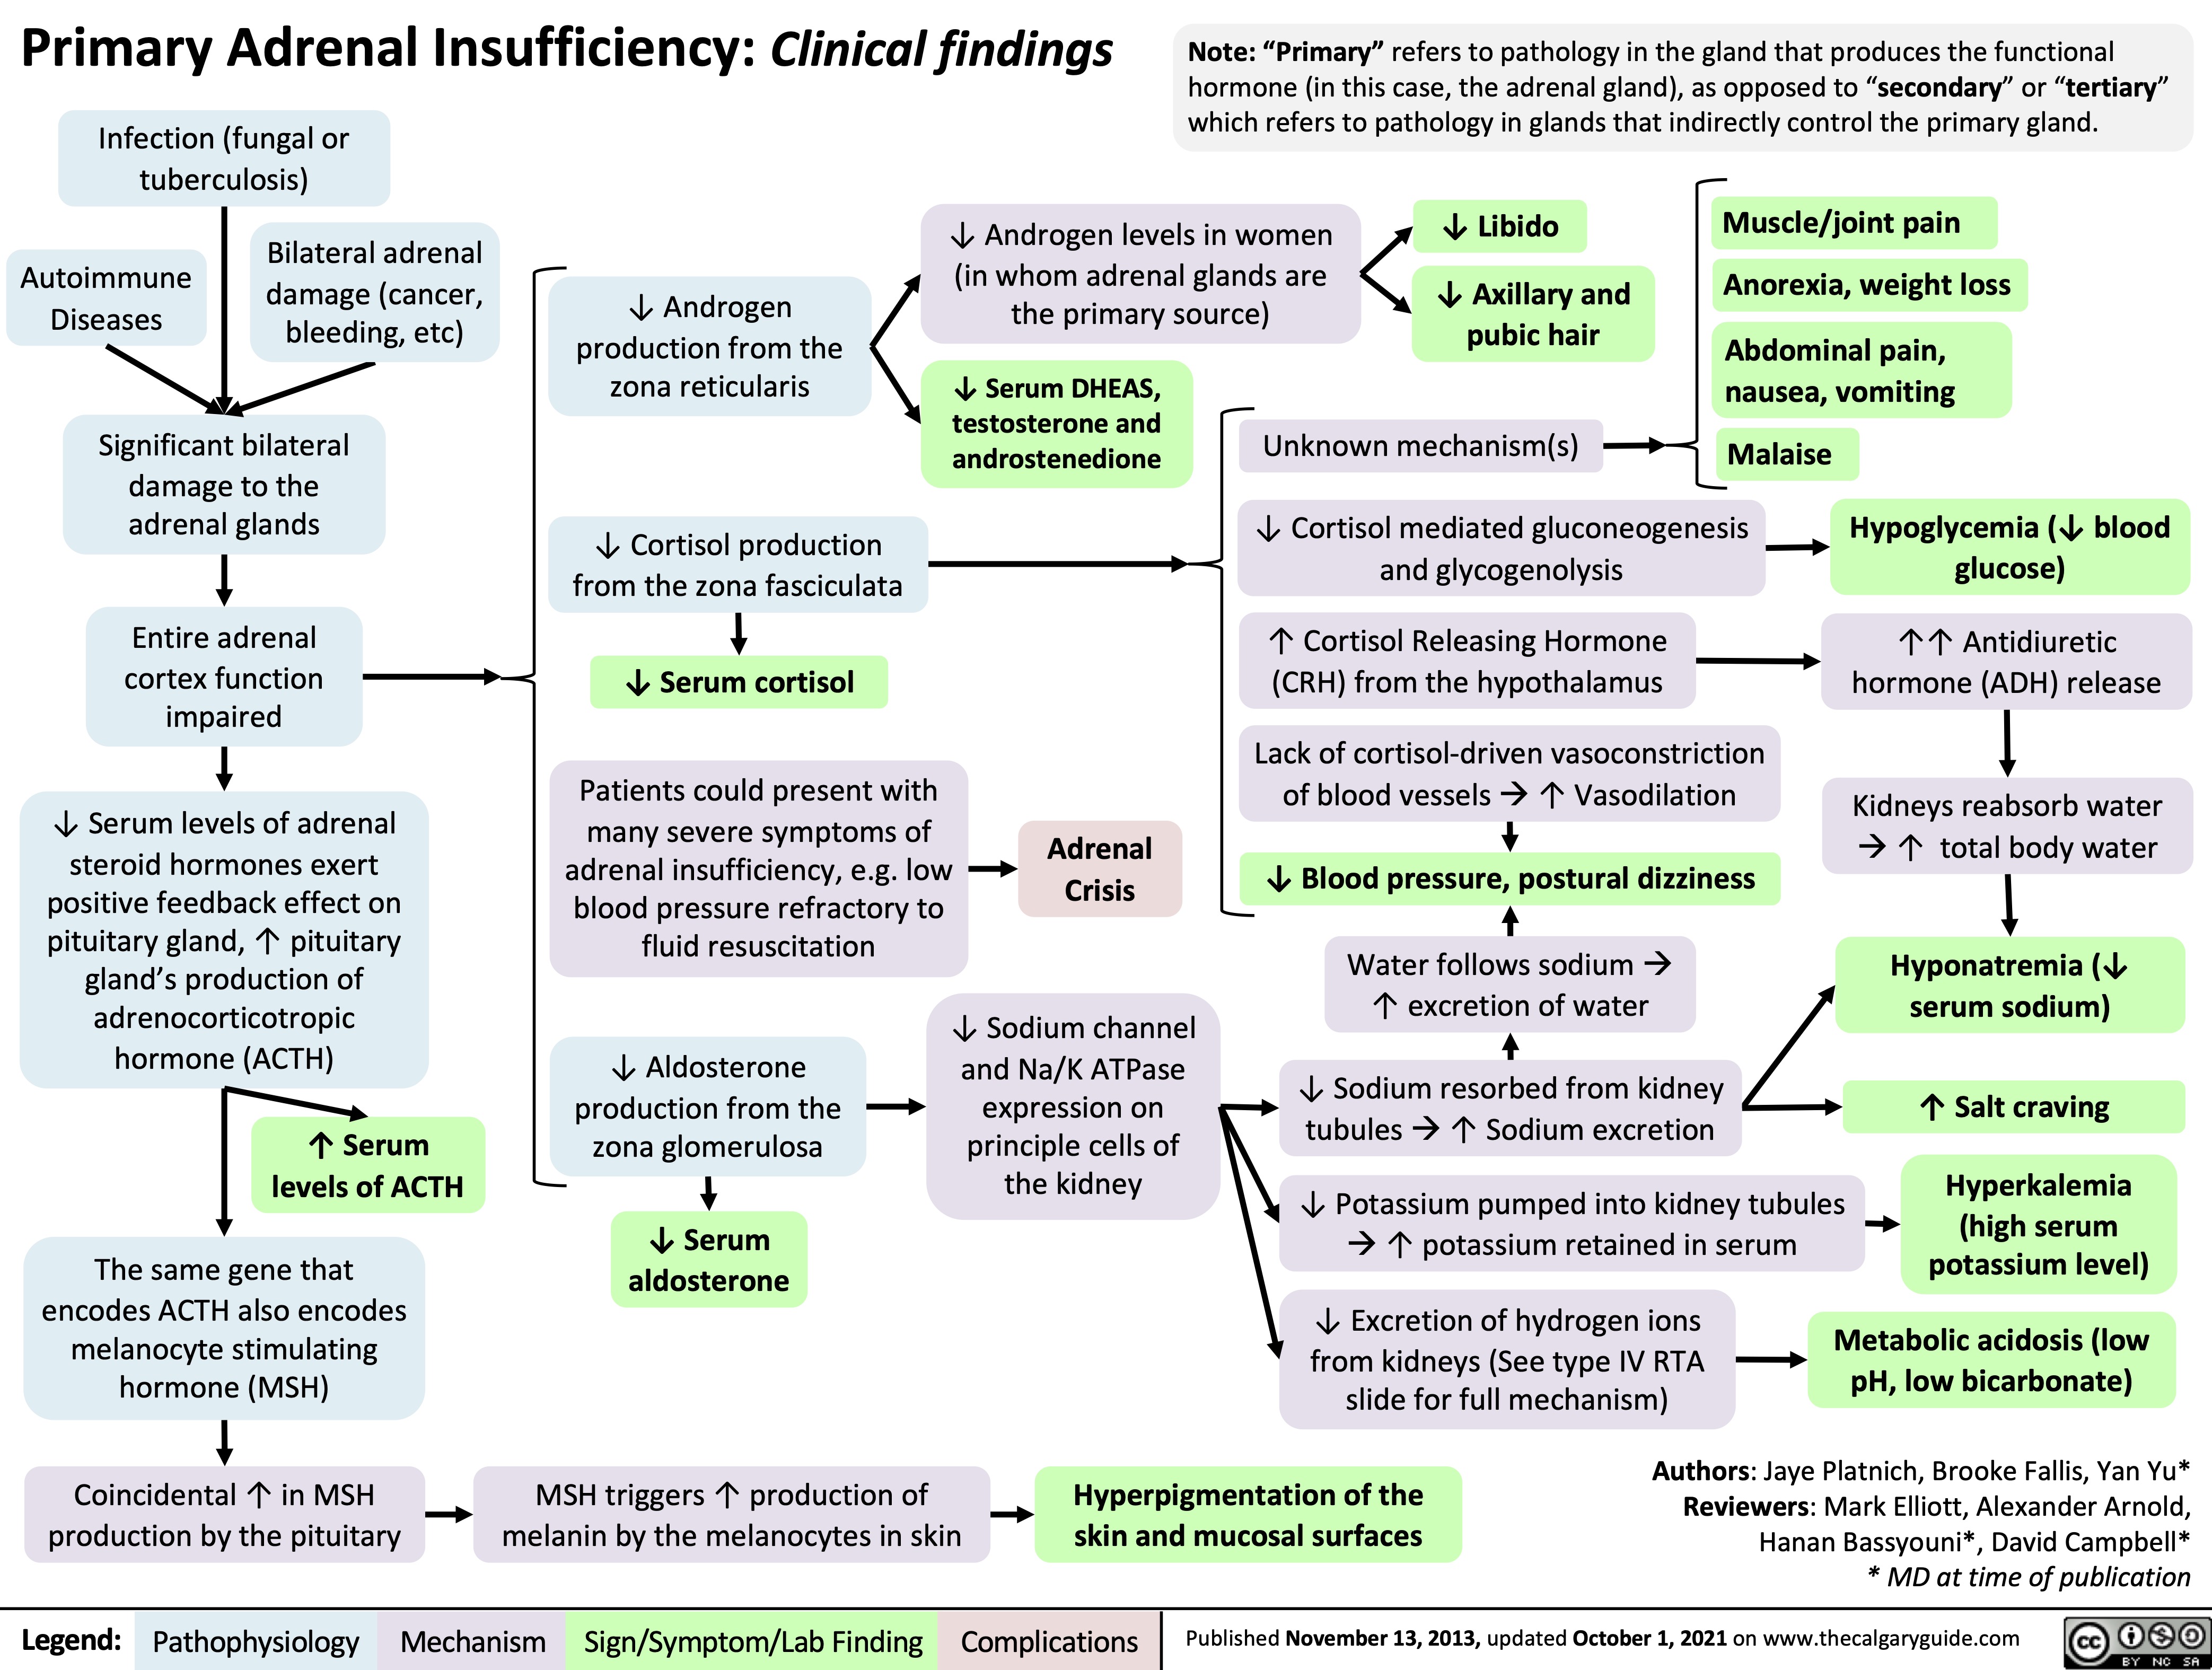 Primary Adrenal Insufficiency: Clinical findings Infection (fungal or
tuberculosis)
Note: “Primary” refers to pathology in the gland that produces the functional hormone (in this case, the adrenal gland), as opposed to “secondary” or “tertiary” which refers to pathology in glands that indirectly control the primary gland.
        Bilateral adrenal Autoimmune damage (cancer,
↓ Androgen levels in women (in whom adrenal glands are the primary source)
↓ Libido
↓ Axillary and pubic hair
Muscle/joint pain
Anorexia, weight loss
Abdominal pain, nausea, vomiting
     Diseases bleeding, etc)
↓ Androgen production from the zona reticularis
↓ Cortisol production from the zona fasciculata
↓ Serum cortisol
Patients could present with many severe symptoms of
adrenal insufficiency, e.g. low blood pressure refractory to fluid resuscitation
       Significant bilateral damage to the adrenal glands
Entire adrenal cortex function impaired
↓ Serum levels of adrenal steroid hormones exert positive feedback effect on pituitary gland, ↑ pituitary gland’s production of adrenocorticotropic hormone (ACTH)
↑ Serum levels of ACTH
The same gene that encodes ACTH also encodes melanocyte stimulating hormone (MSH)
Coincidental ↑ in MSH production by the pituitary
↓ Serum DHEAS, testosterone and androstenedione
Unknown mechanism(s)
Malaise
                Adrenal Crisis
↓ Cortisol mediated gluconeogenesis and glycogenolysis
↑ Cortisol Releasing Hormone (CRH) from the hypothalamus
Lack of cortisol-driven vasoconstriction of blood vesselsà↑ Vasodilation
↓ Blood pressure, postural dizziness
Water follows sodiumà ↑ excretion of water
↓ Sodium resorbed from kidney tubulesà↑ Sodium excretion
↓ Potassium pumped into kidney tubules à↑ potassium retained in serum
Hypoglycemia (↓ blood glucose)
↑↑ Antidiuretic hormone (ADH) release
Kidneys reabsorb water à↑ total body water
Hyponatremia (↓ serum sodium)
↑ Salt craving
Hyperkalemia (high serum potassium level)
     ↓ Aldosterone production from the zona glomerulosa
↓ Serum aldosterone
MSH triggers ↑ production of melanin by the melanocytes in skin
↓ Excretion of hydrogen ions from kidneys (See type IV RTA slide for full mechanism)
Metabolic acidosis (low pH, low bicarbonate)
↓ Sodium channel and Na/K ATPase
expression on principle cells of the kidney
            Hyperpigmentation of the skin and mucosal surfaces
Authors: Jaye Platnich, Brooke Fallis, Yan Yu* Reviewers: Mark Elliott, Alexander Arnold, Hanan Bassyouni*, David Campbell* * MD at time of publication
 Legend:
 Pathophysiology
Mechanism
Sign/Symptom/Lab Finding
 Complications
 Published November 13, 2013, updated October 1, 2021 on www.thecalgaryguide.com
   